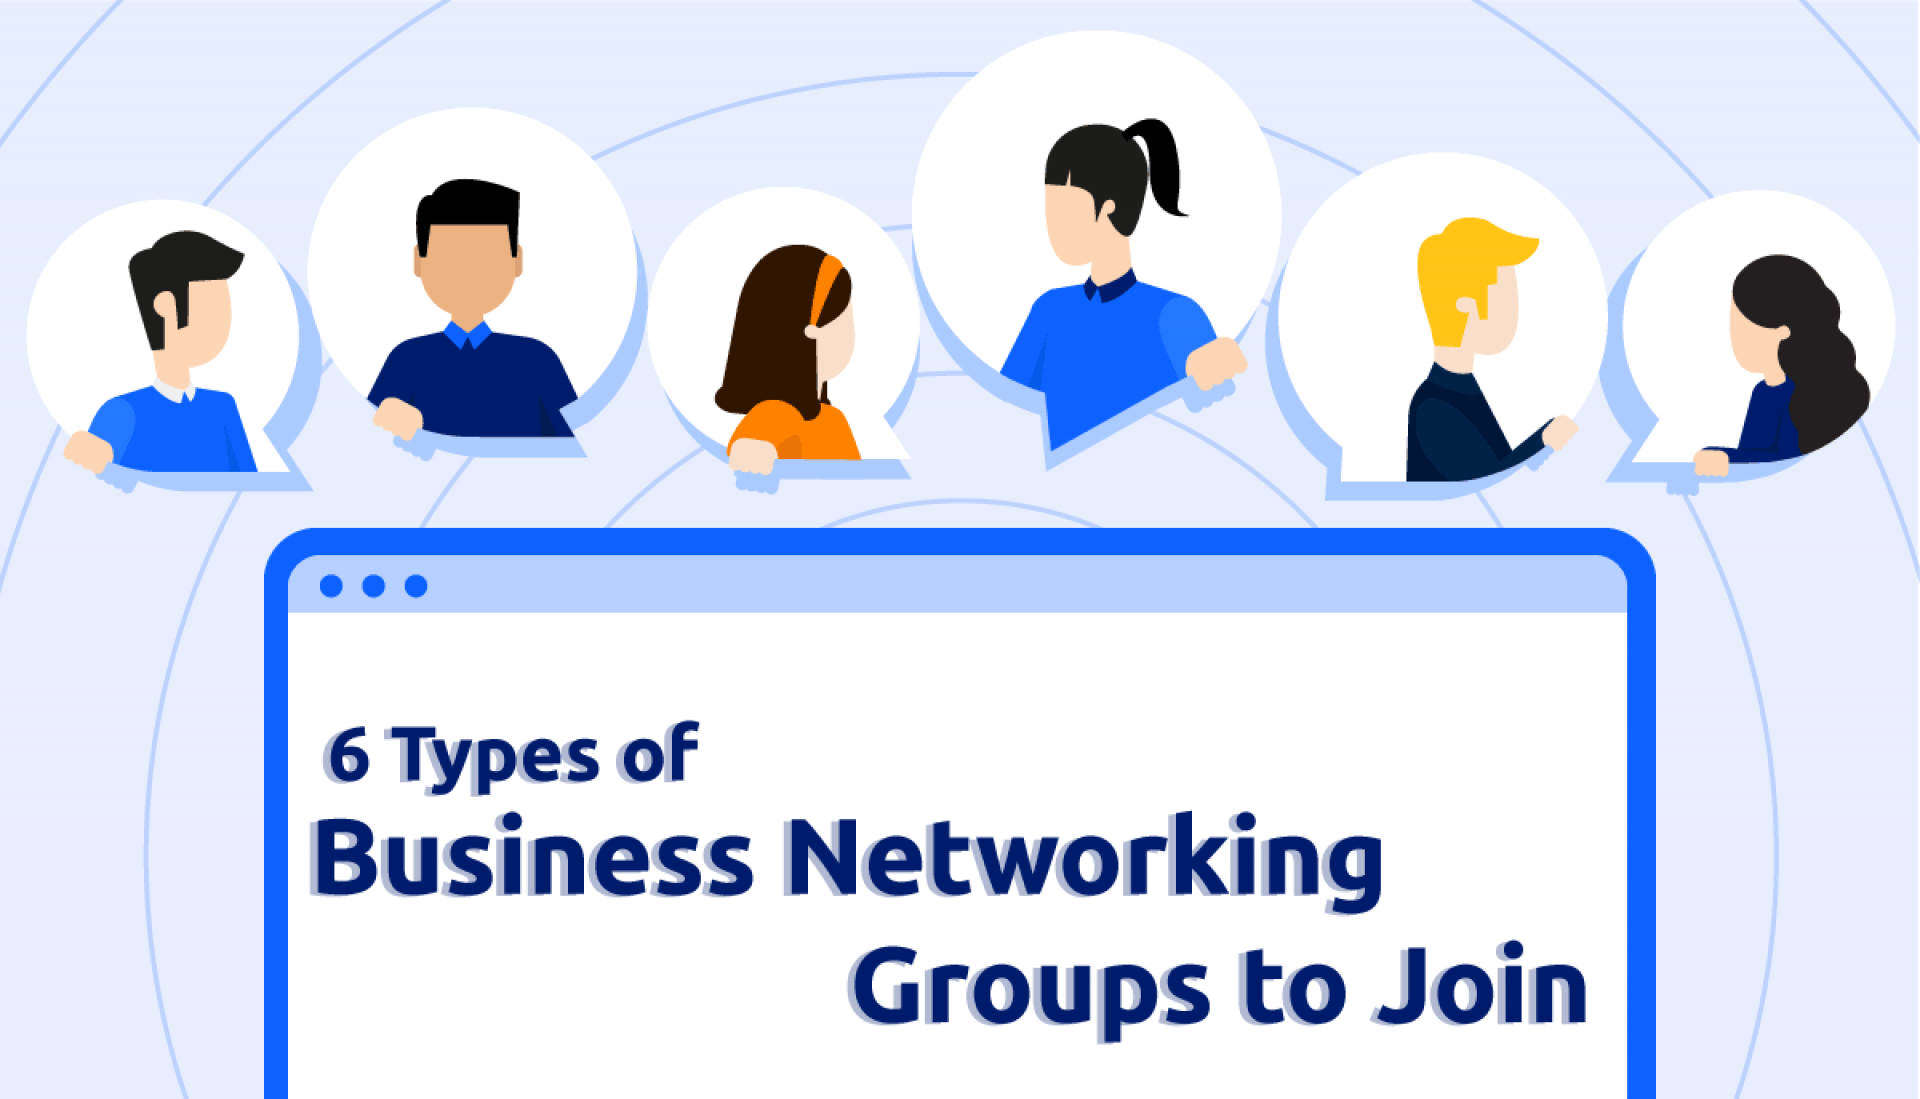 6 Types of Business Networking Groups to Join